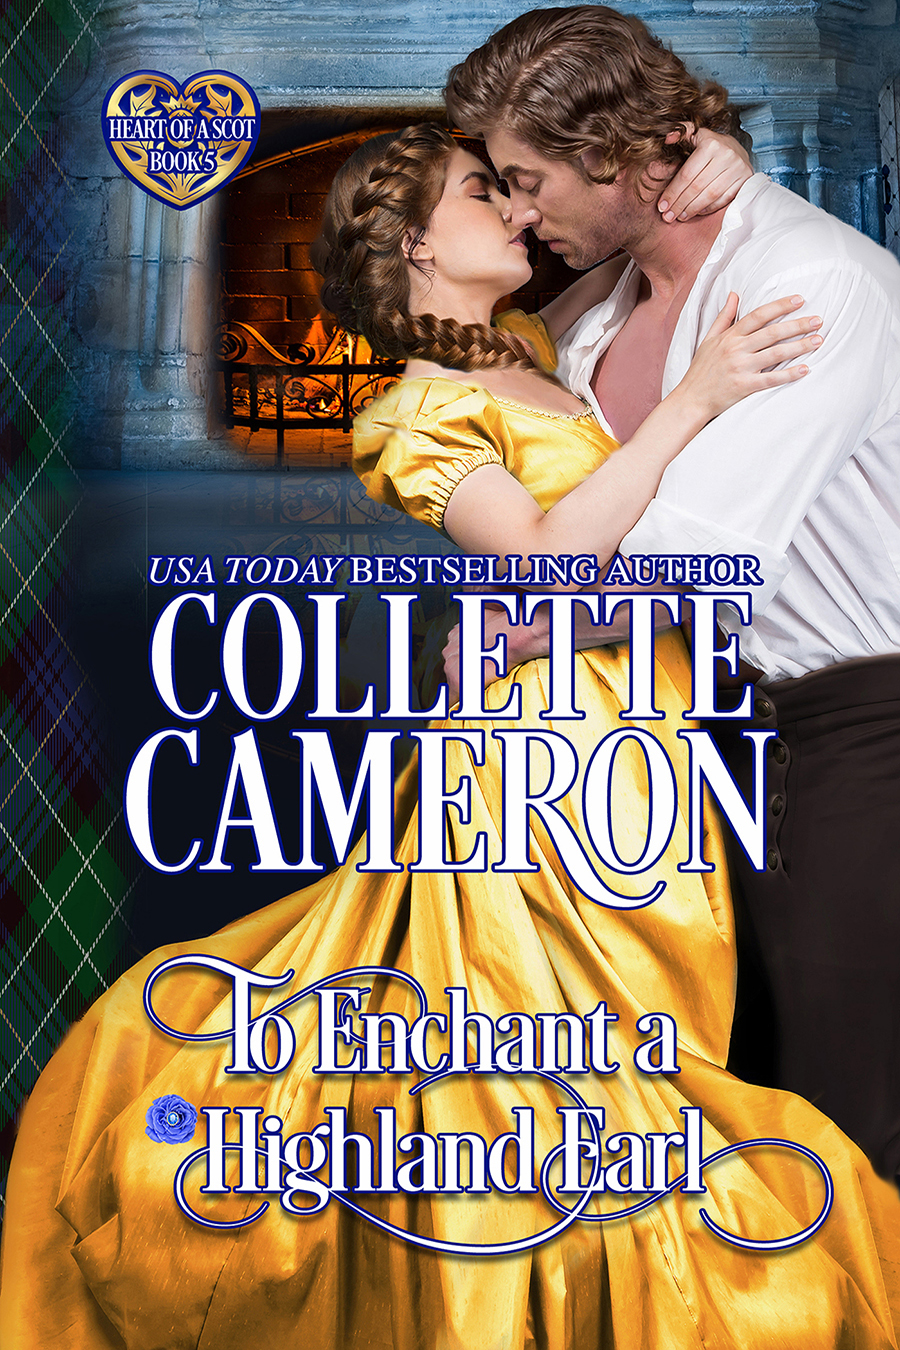 The rerelease of TO ENCHANT A HIGHLAND EARL is here!